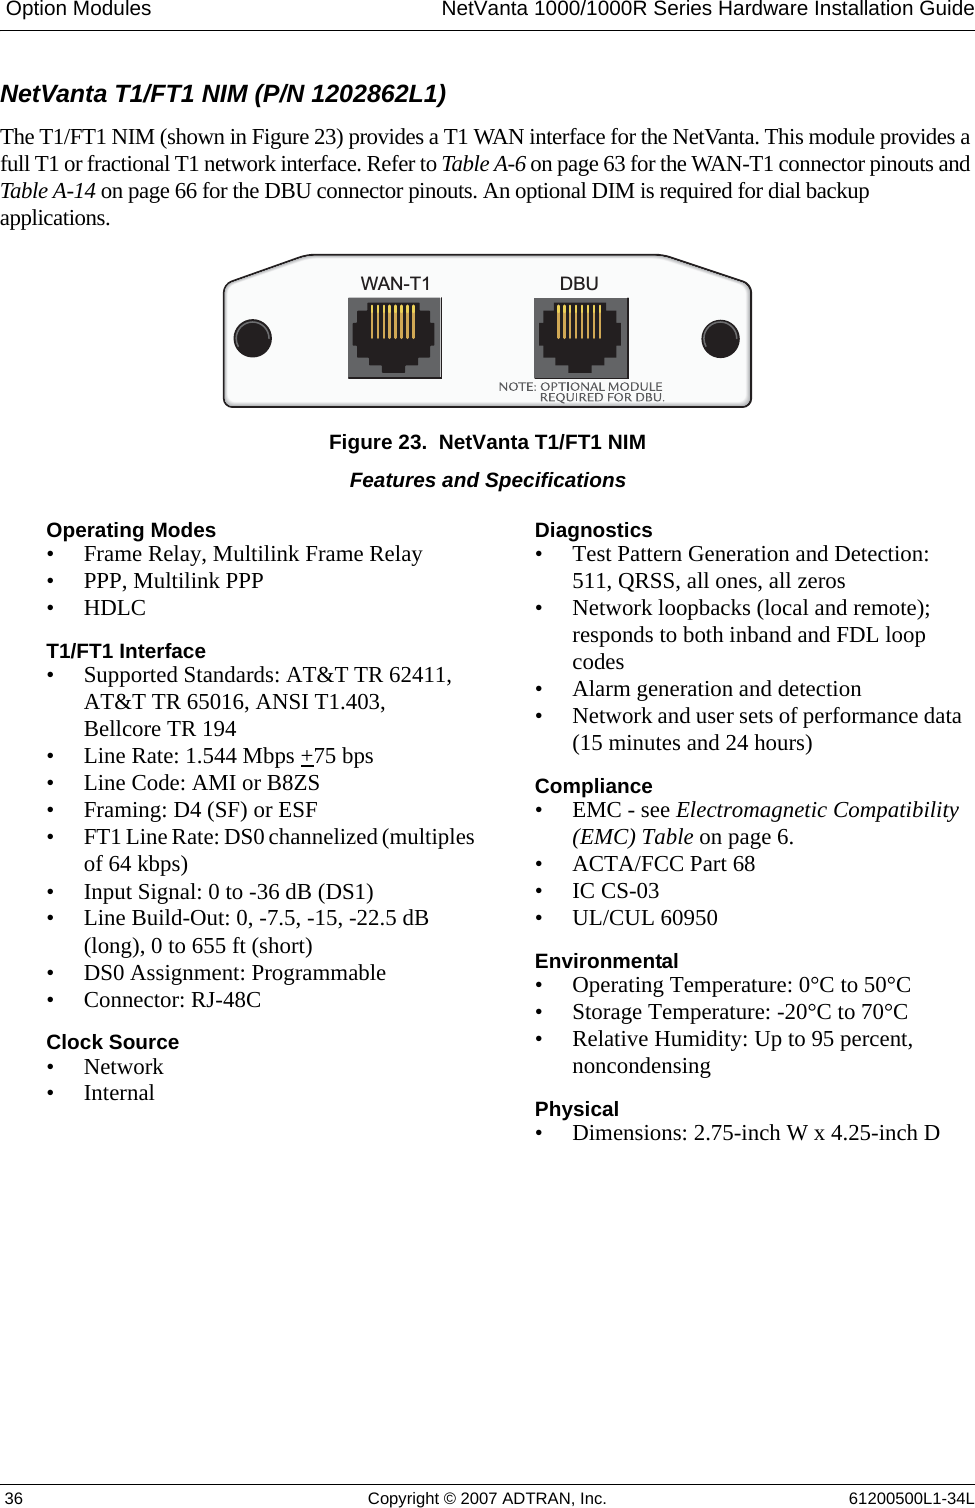  Option Modules NetVanta 1000/1000R Series Hardware Installation Guide 36 Copyright © 2007 ADTRAN, Inc. 61200500L1-34LNetVanta T1/FT1 NIM (P/N 1202862L1)The T1/FT1 NIM (shown in Figure 23) provides a T1 WAN interface for the NetVanta. This module provides a full T1 or fractional T1 network interface. Refer to Table A-6 on page 63 for the WAN-T1 connector pinouts and Table A-14 on page 66 for the DBU connector pinouts. An optional DIM is required for dial backup applications.Figure 23.  NetVanta T1/FT1 NIMWAN-T1DBUFeatures and SpecificationsOperating Modes• Frame Relay, Multilink Frame Relay• PPP, Multilink PPP• HDLCT1/FT1 Interface• Supported Standards: AT&amp;T TR 62411, AT&amp;T TR 65016, ANSI T1.403, Bellcore TR 194• Line Rate: 1.544 Mbps +75 bps• Line Code: AMI or B8ZS• Framing: D4 (SF) or ESF• FT1 Line Rate: DS0 channelized (multiples of 64 kbps)• Input Signal: 0 to -36 dB (DS1)• Line Build-Out: 0, -7.5, -15, -22.5 dB (long), 0 to 655 ft (short)• DS0 Assignment: Programmable• Connector: RJ-48CClock Source•Network•InternalDiagnostics• Test Pattern Generation and Detection: 511, QRSS, all ones, all zeros• Network loopbacks (local and remote); responds to both inband and FDL loop codes• Alarm generation and detection• Network and user sets of performance data (15 minutes and 24 hours)Compliance• EMC - see Electromagnetic Compatibility (EMC) Table on page 6.• ACTA/FCC Part 68• IC CS-03• UL/CUL 60950Environmental• Operating Temperature: 0°C to 50°C• Storage Temperature: -20°C to 70°C• Relative Humidity: Up to 95 percent, noncondensingPhysical• Dimensions: 2.75-inch W x 4.25-inch D